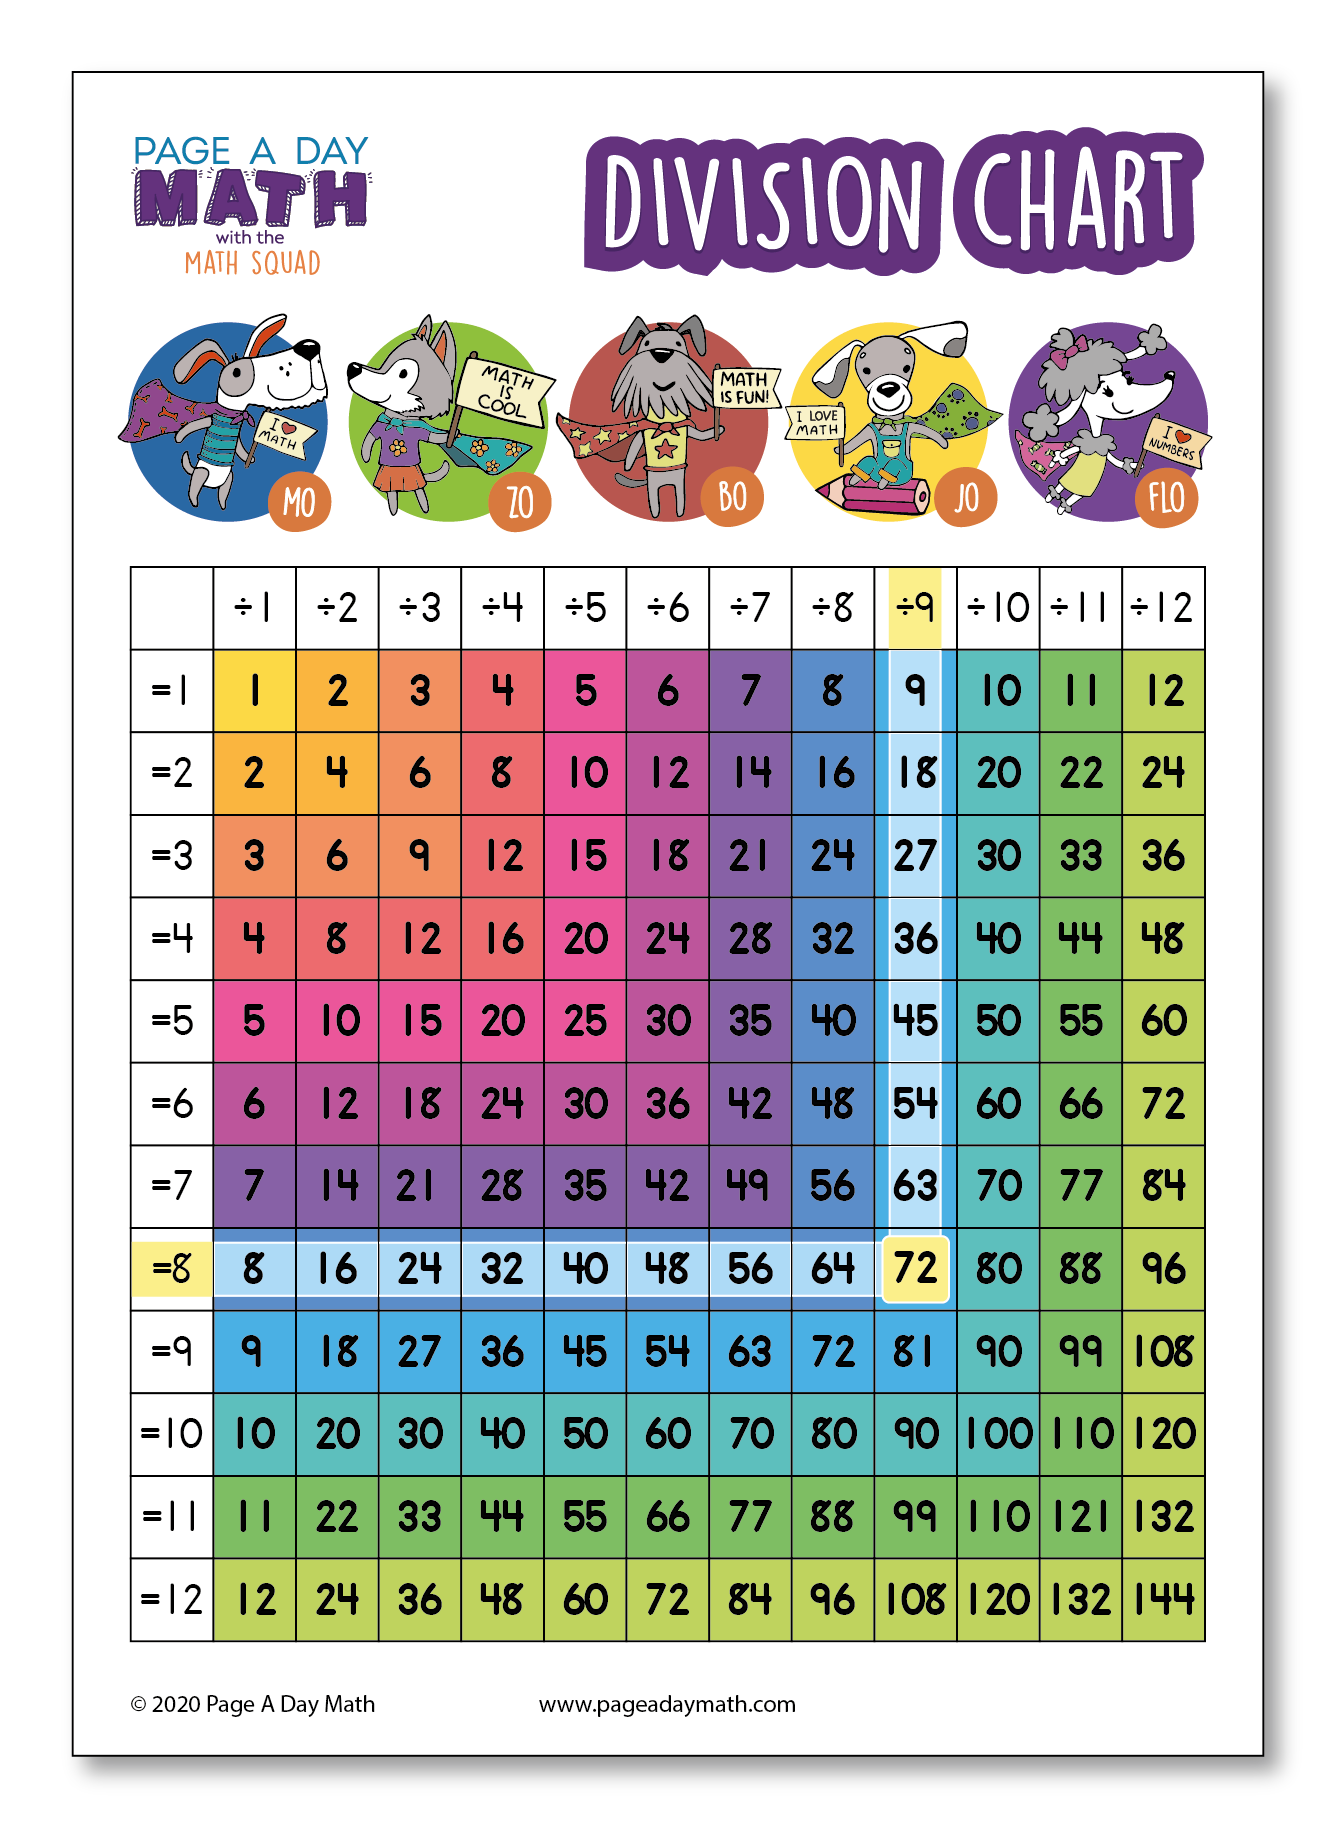 Division Table, Division Chart, Division Activity, Stickers Page A